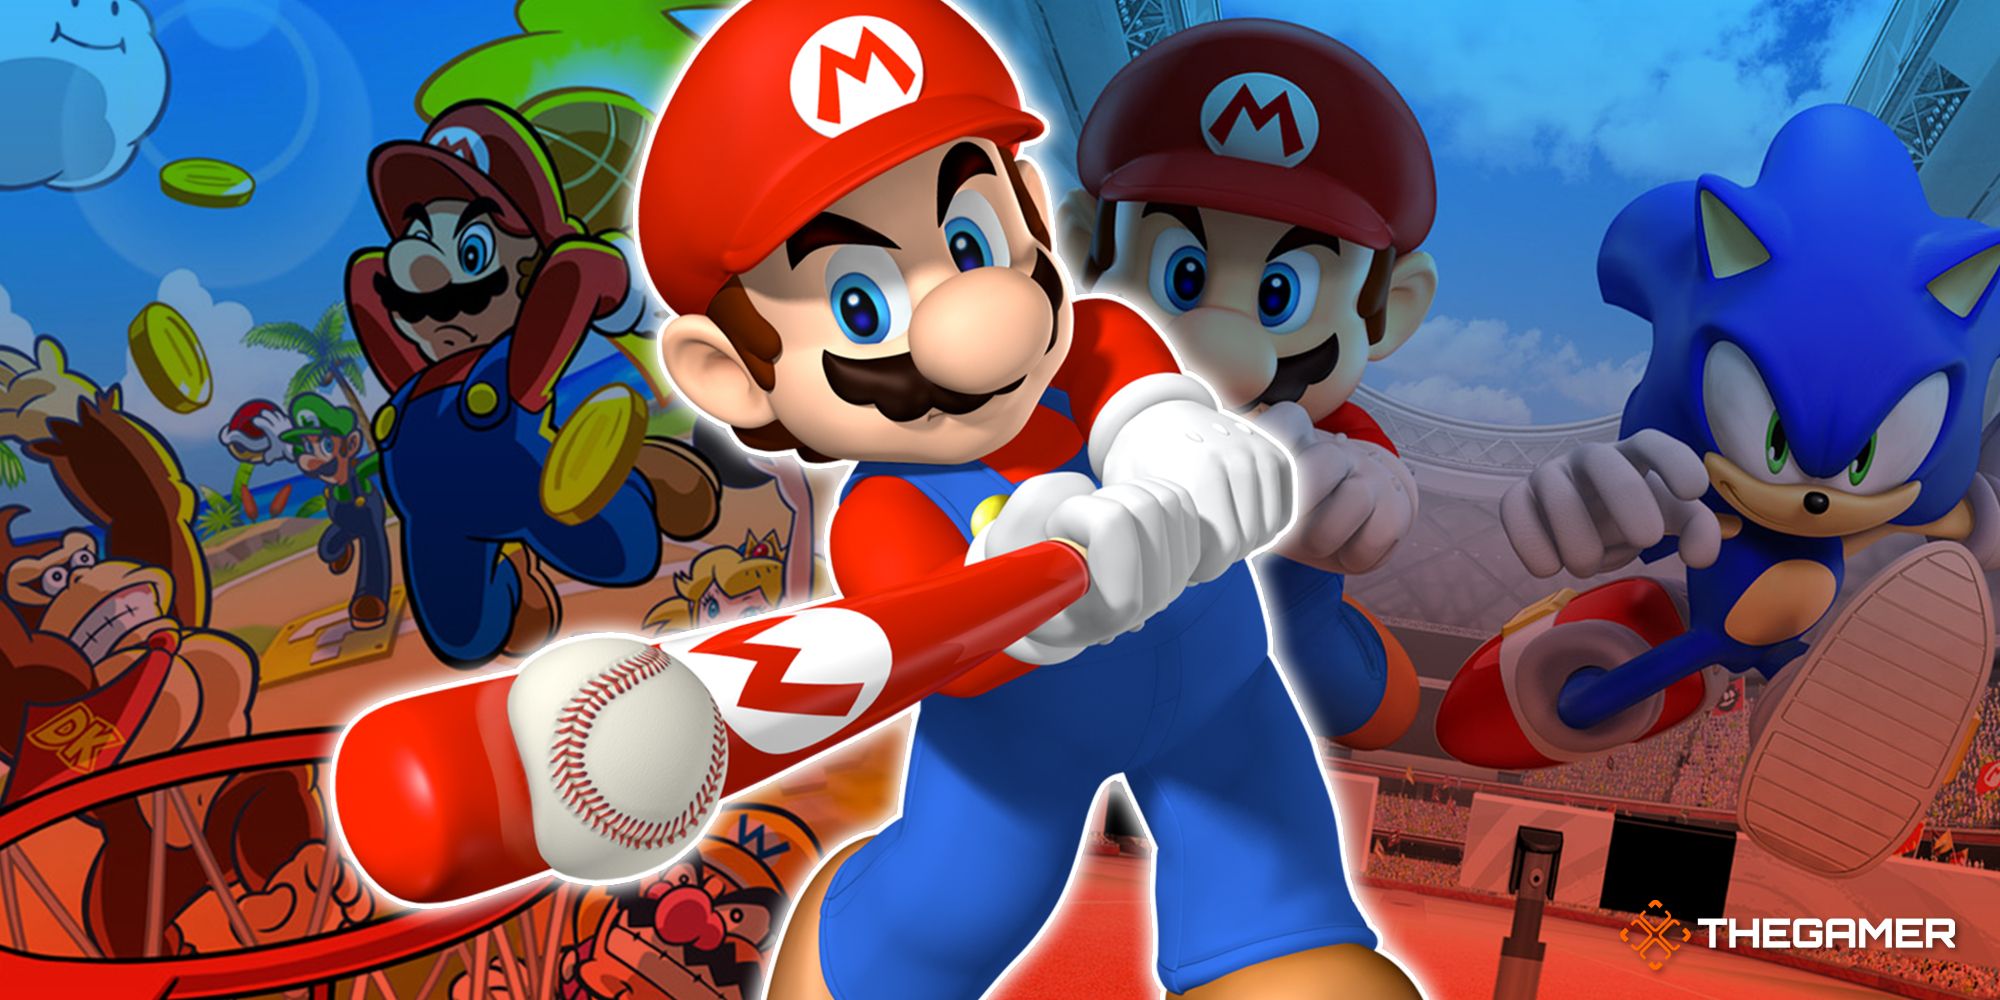 Game images from Mario Hoops 3-On-3, Mario Superstar Baseball and Mario & Sonic At The Olympic Games.